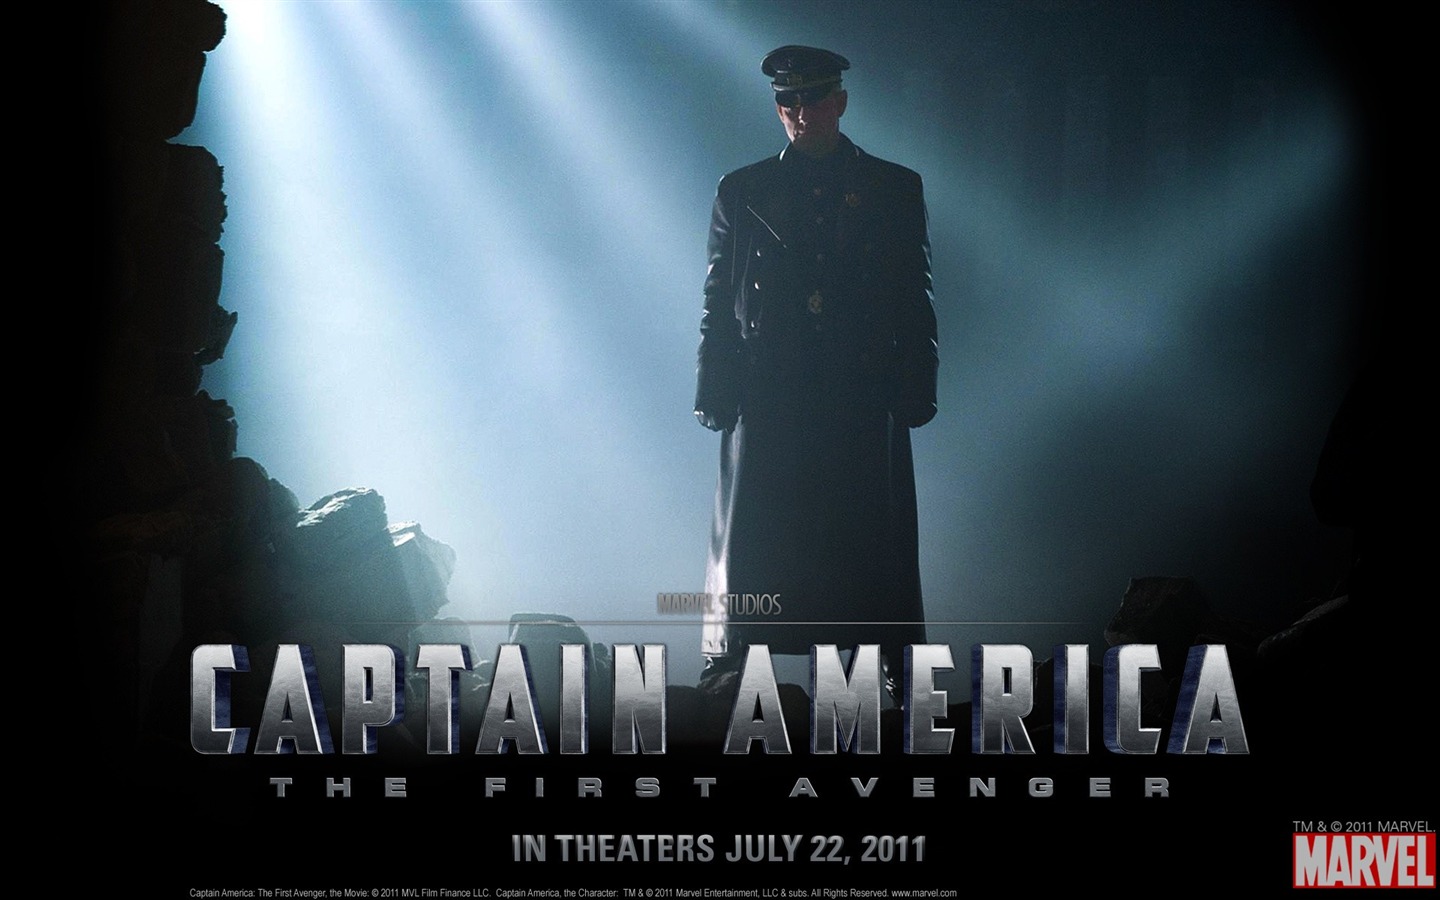 Captain America: The First Avenger wallpapers HD #19 - 1440x900